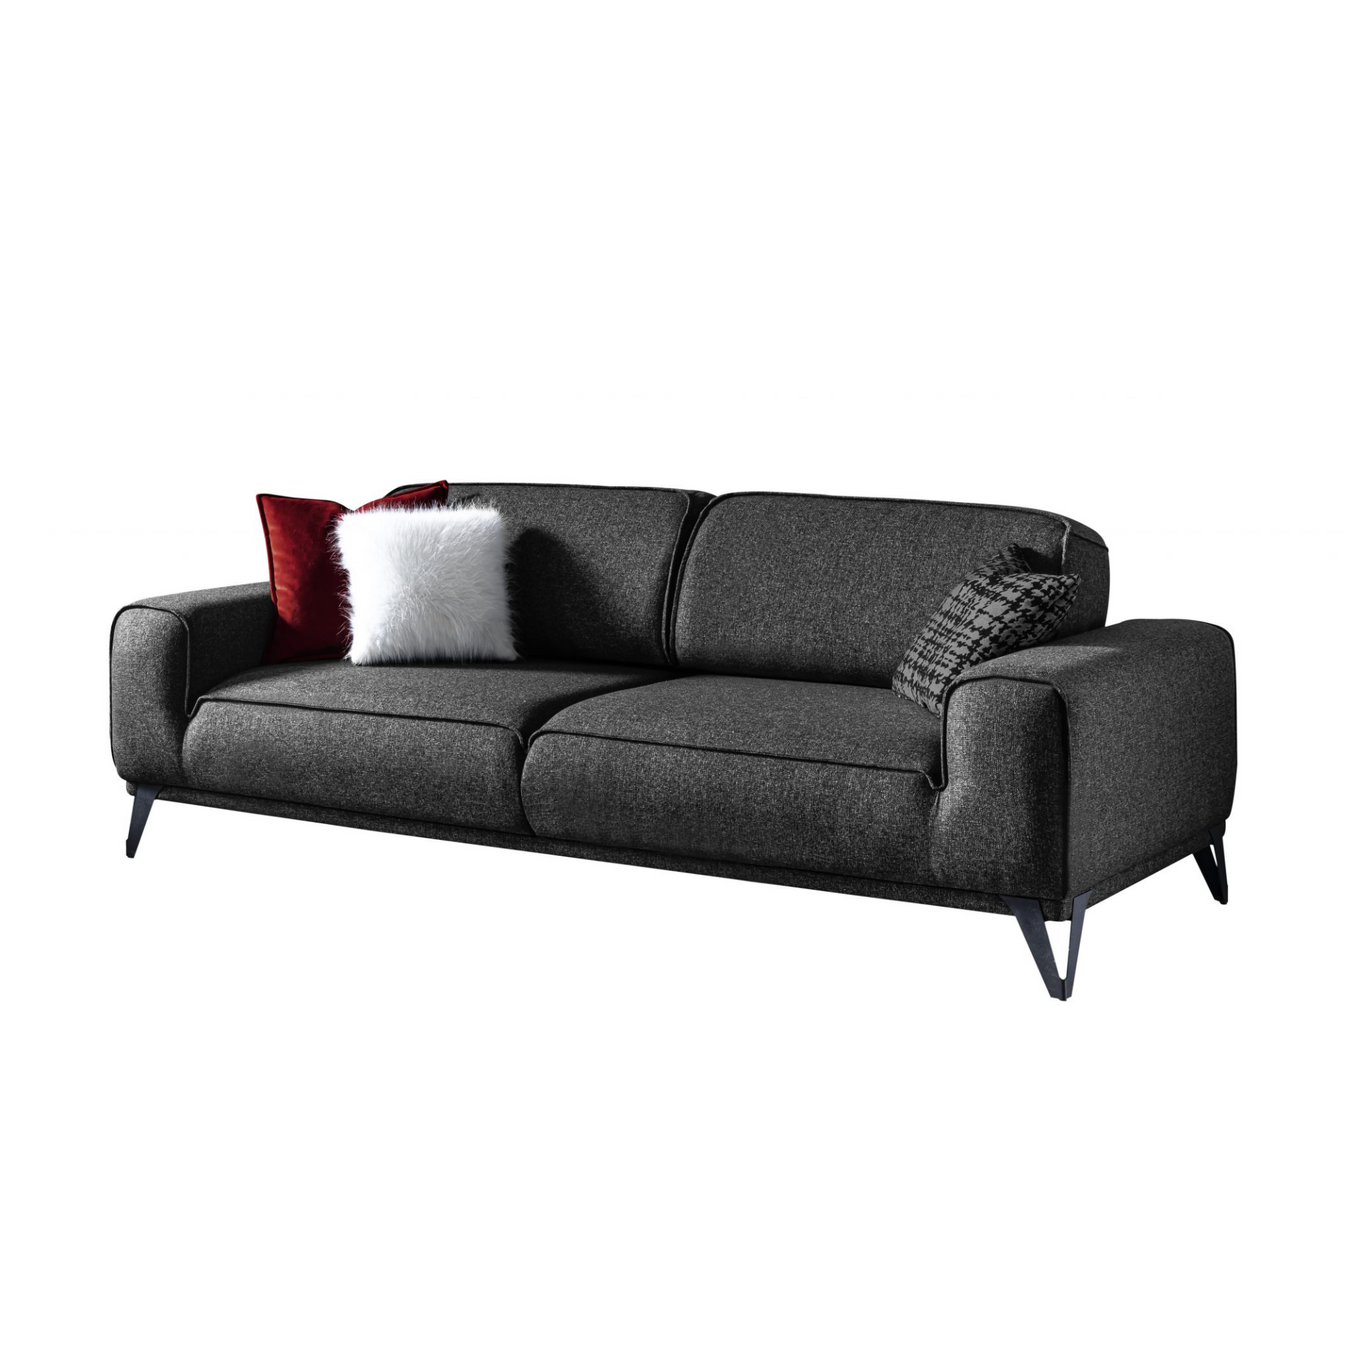 Whiteline Modern Sofas and sectionals